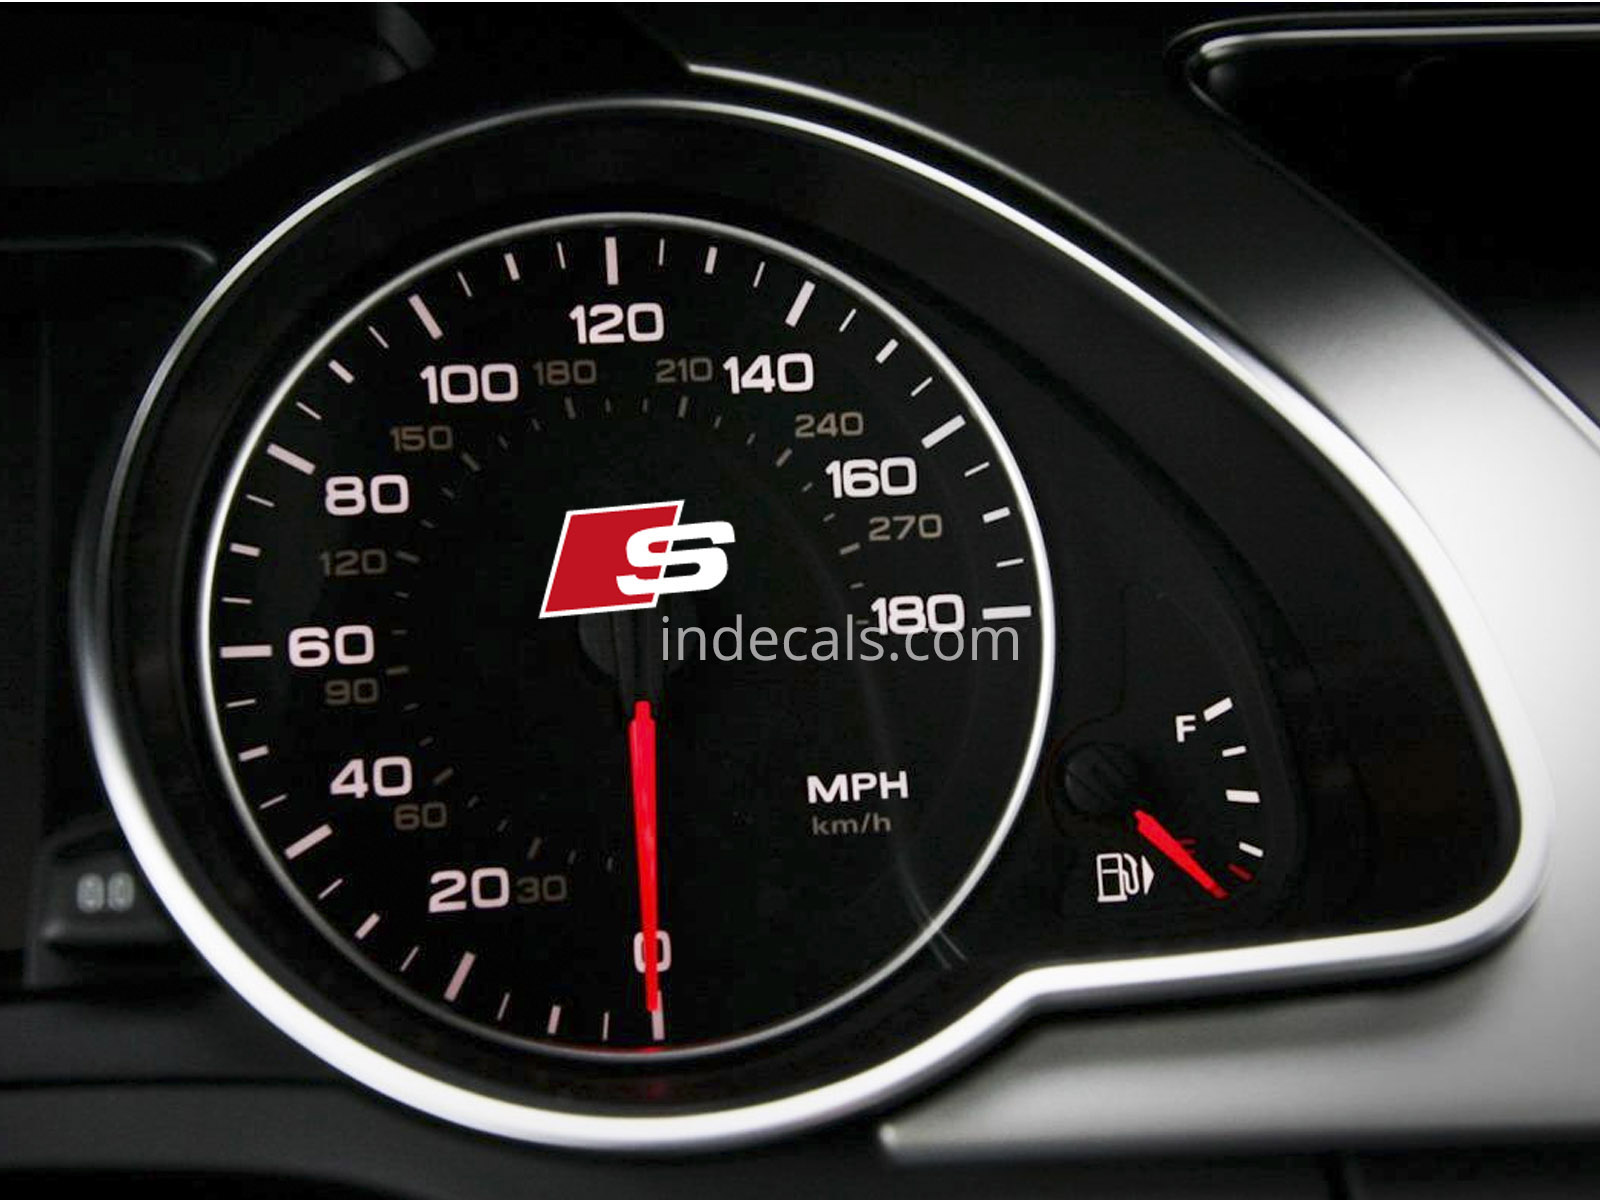 2 x Audi S-Line Stickers for Speedo - White + Red